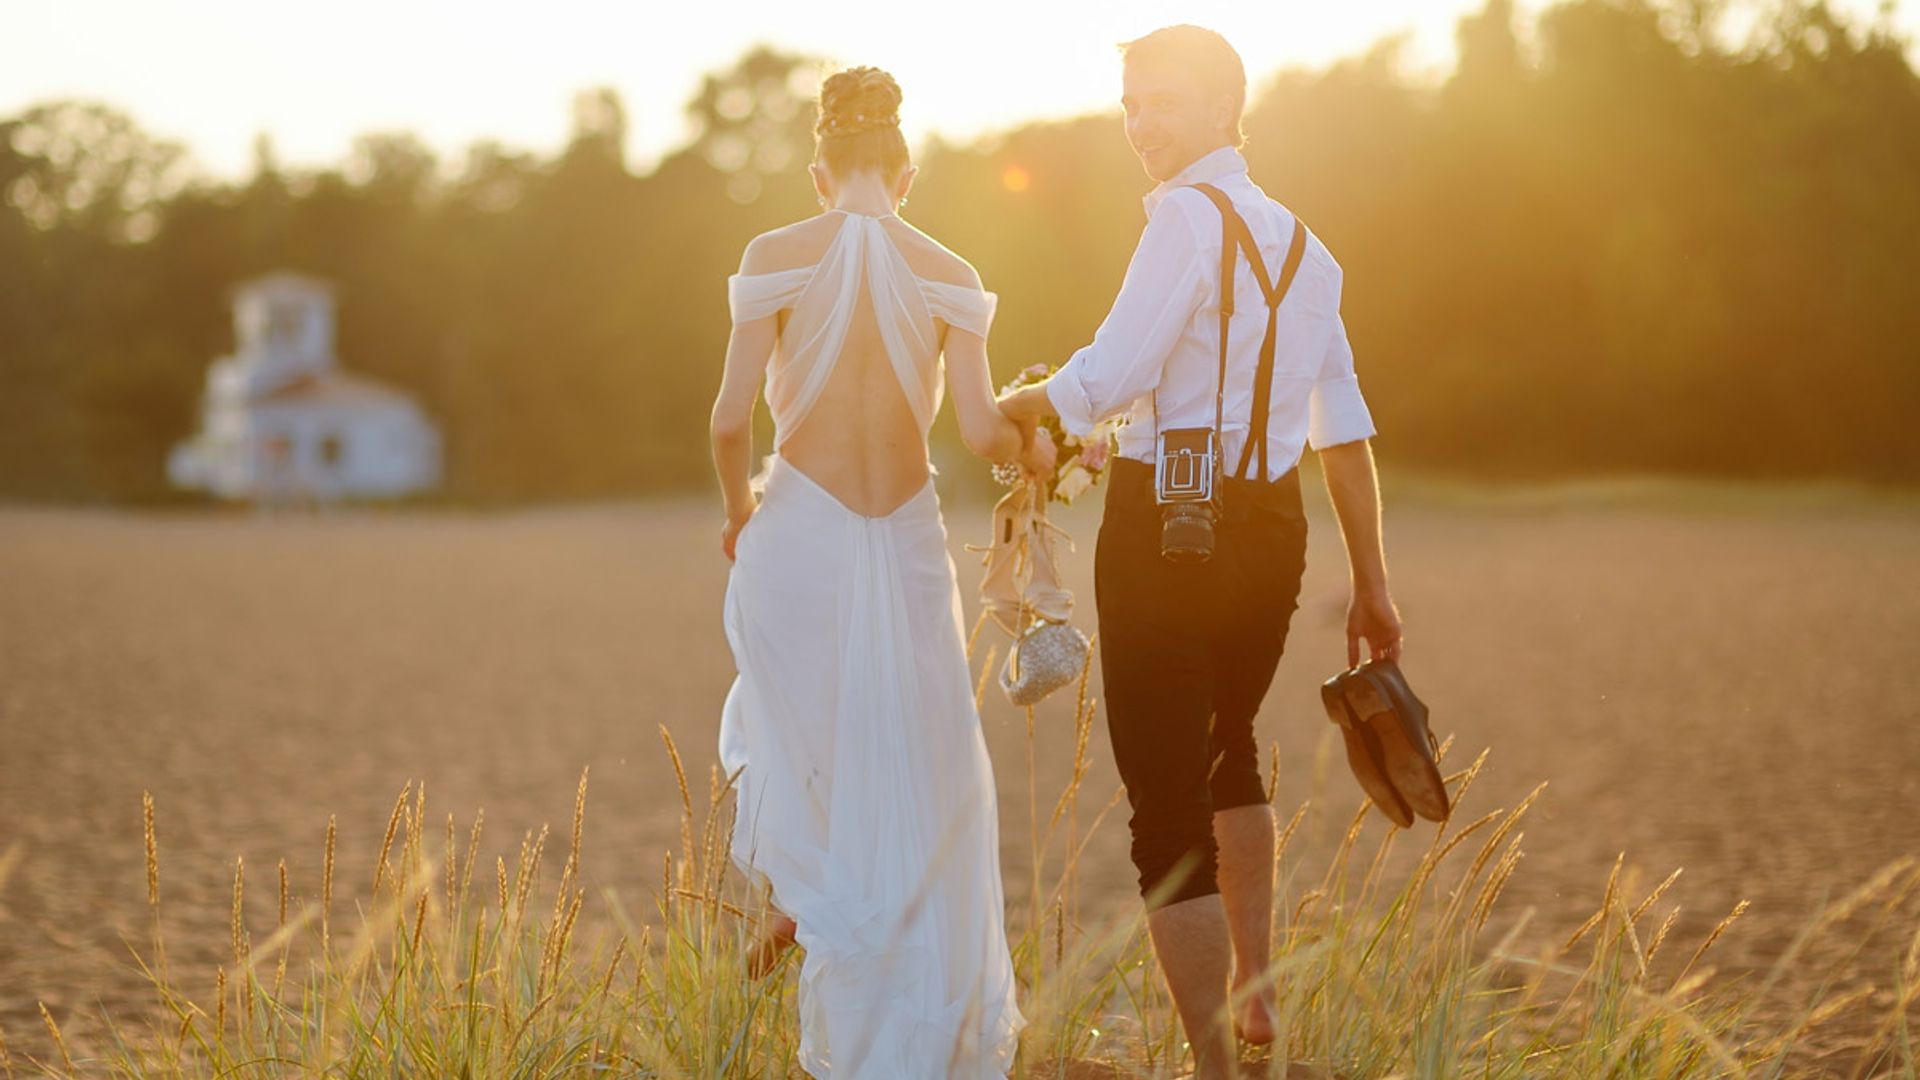 Wedding heatwave hacks! 8 expert tips to deal with hot weather on